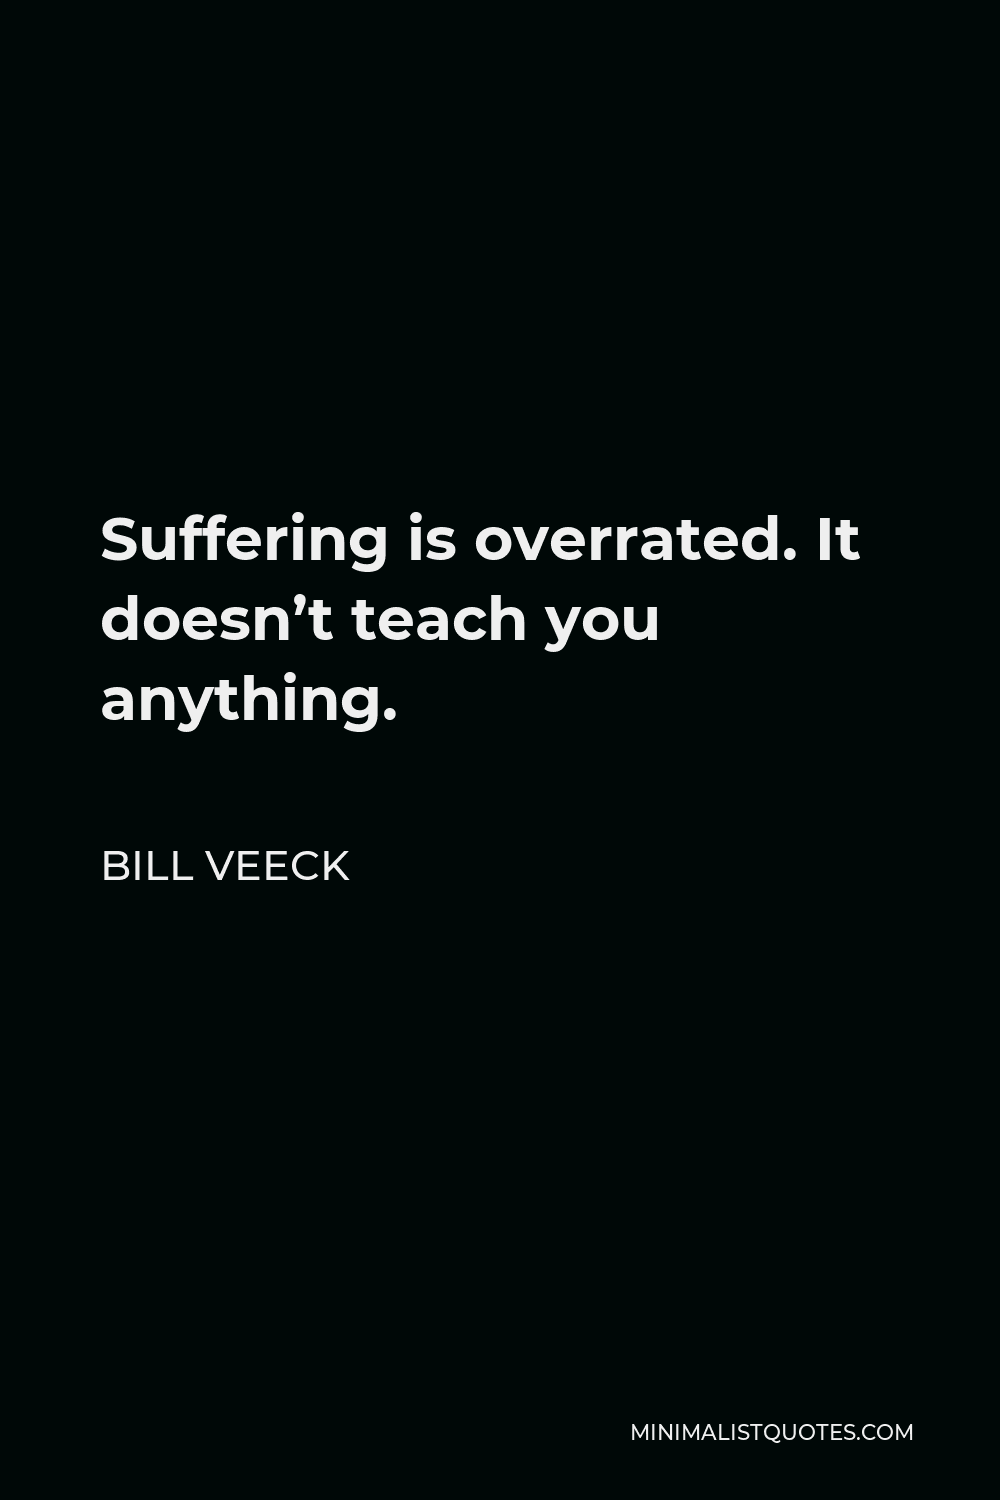 Bill Veeck Quote - Suffering is overrated. It doesn’t teach you anything.